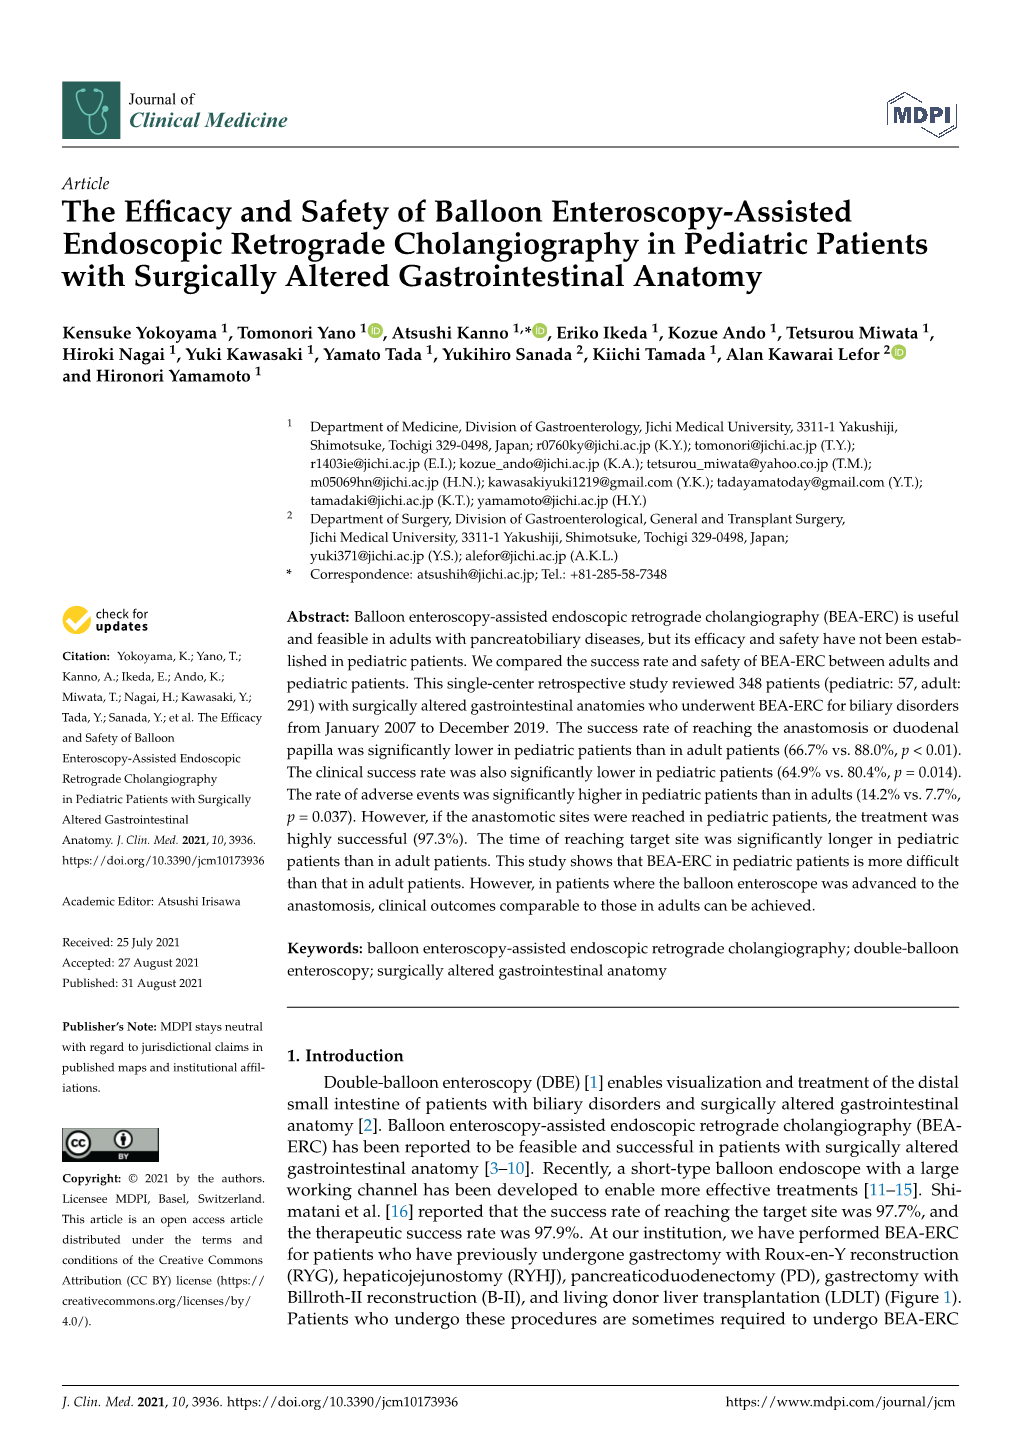 The Efficacy and Safety of Balloon Enteroscopy-Assisted Endoscopic